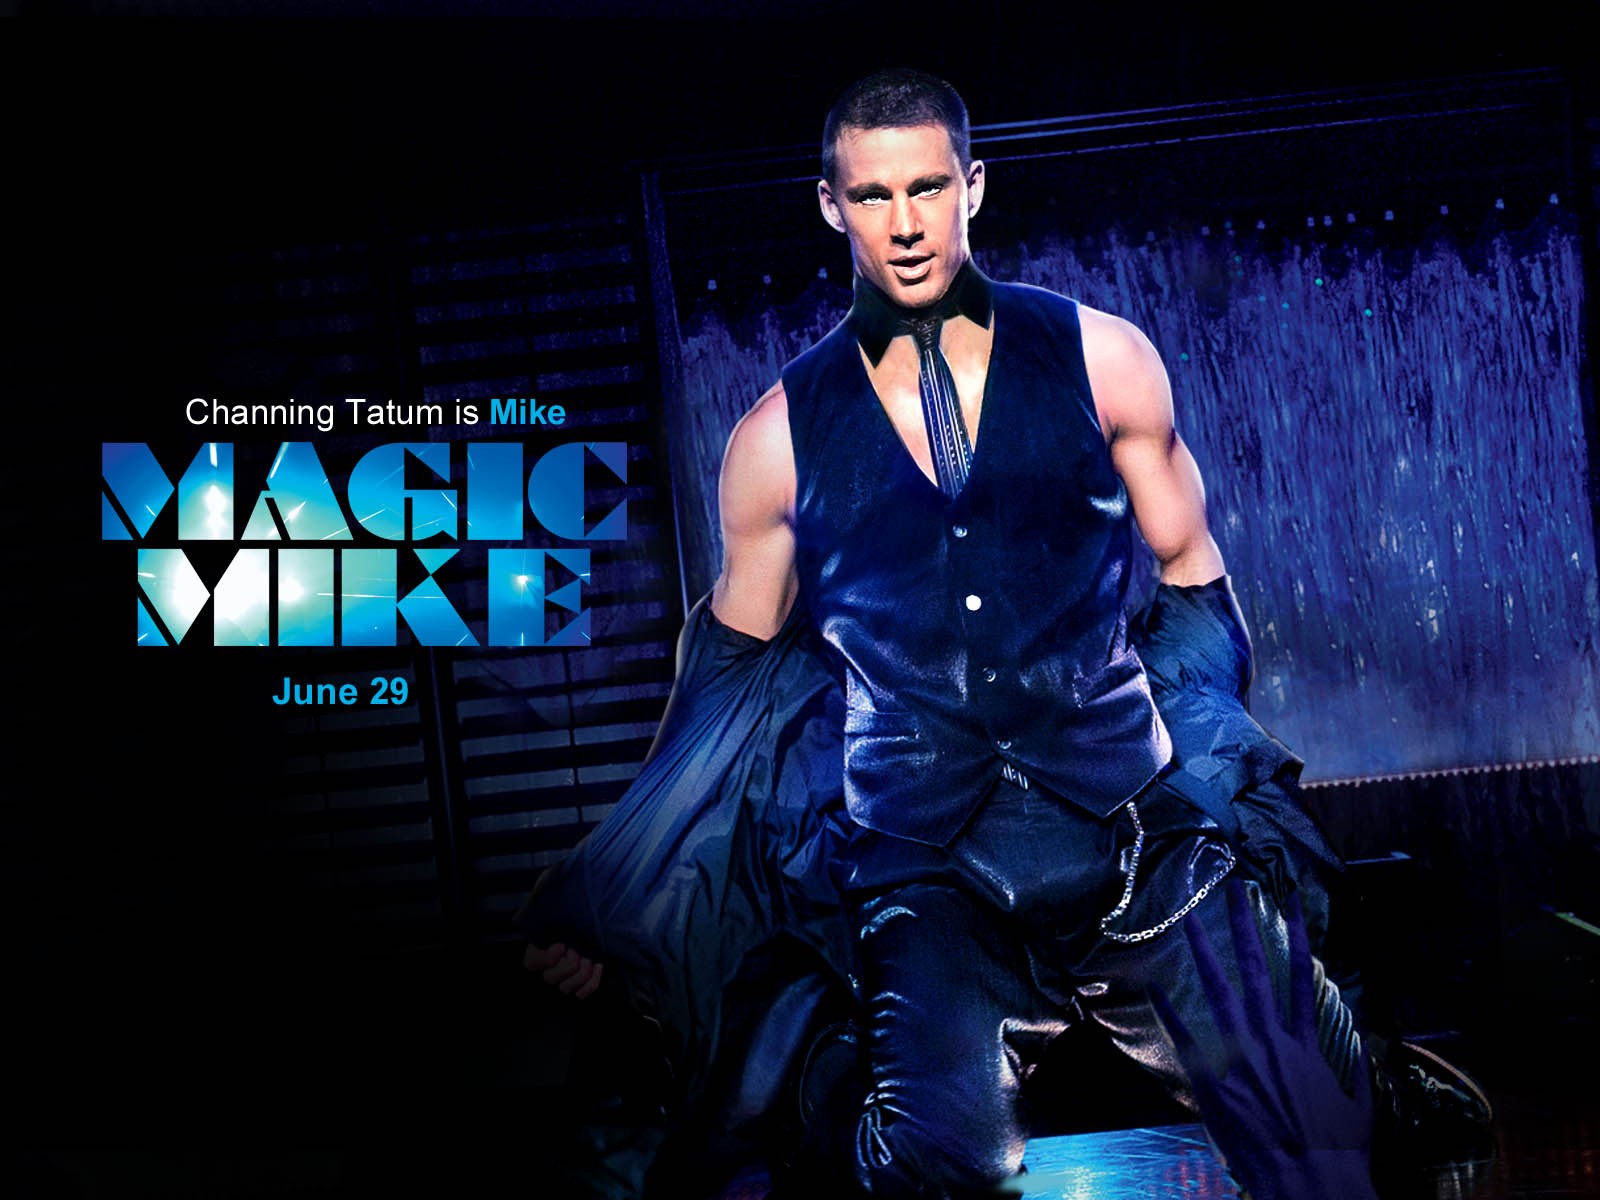 magic mike wallpaper,performance,fashion,music artist,muscle,event